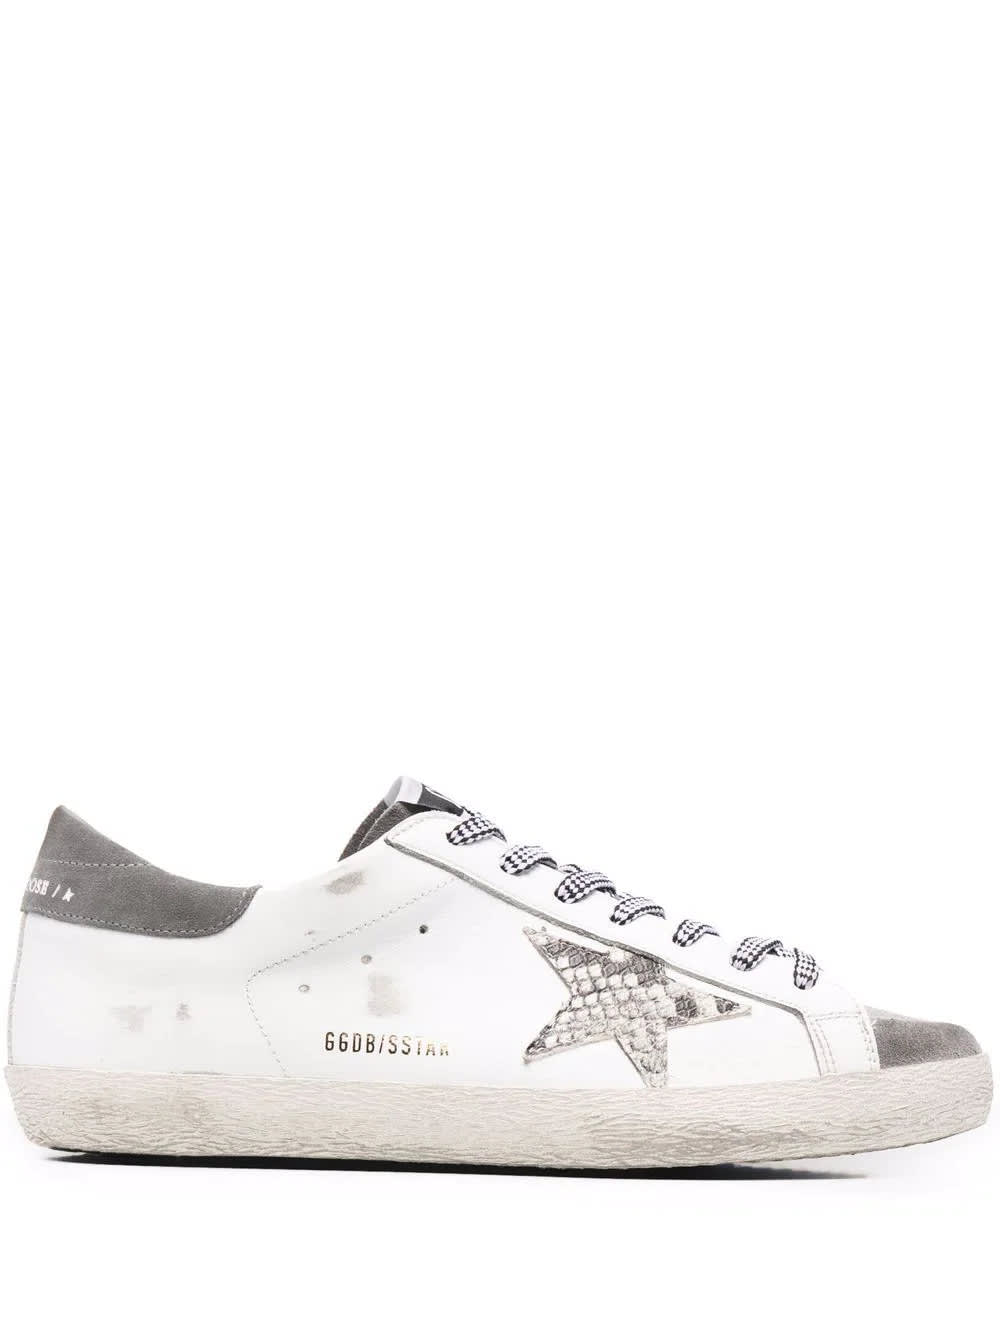 Golden Goose Man White And Grey Super-star Sneakers With Python Printed Star